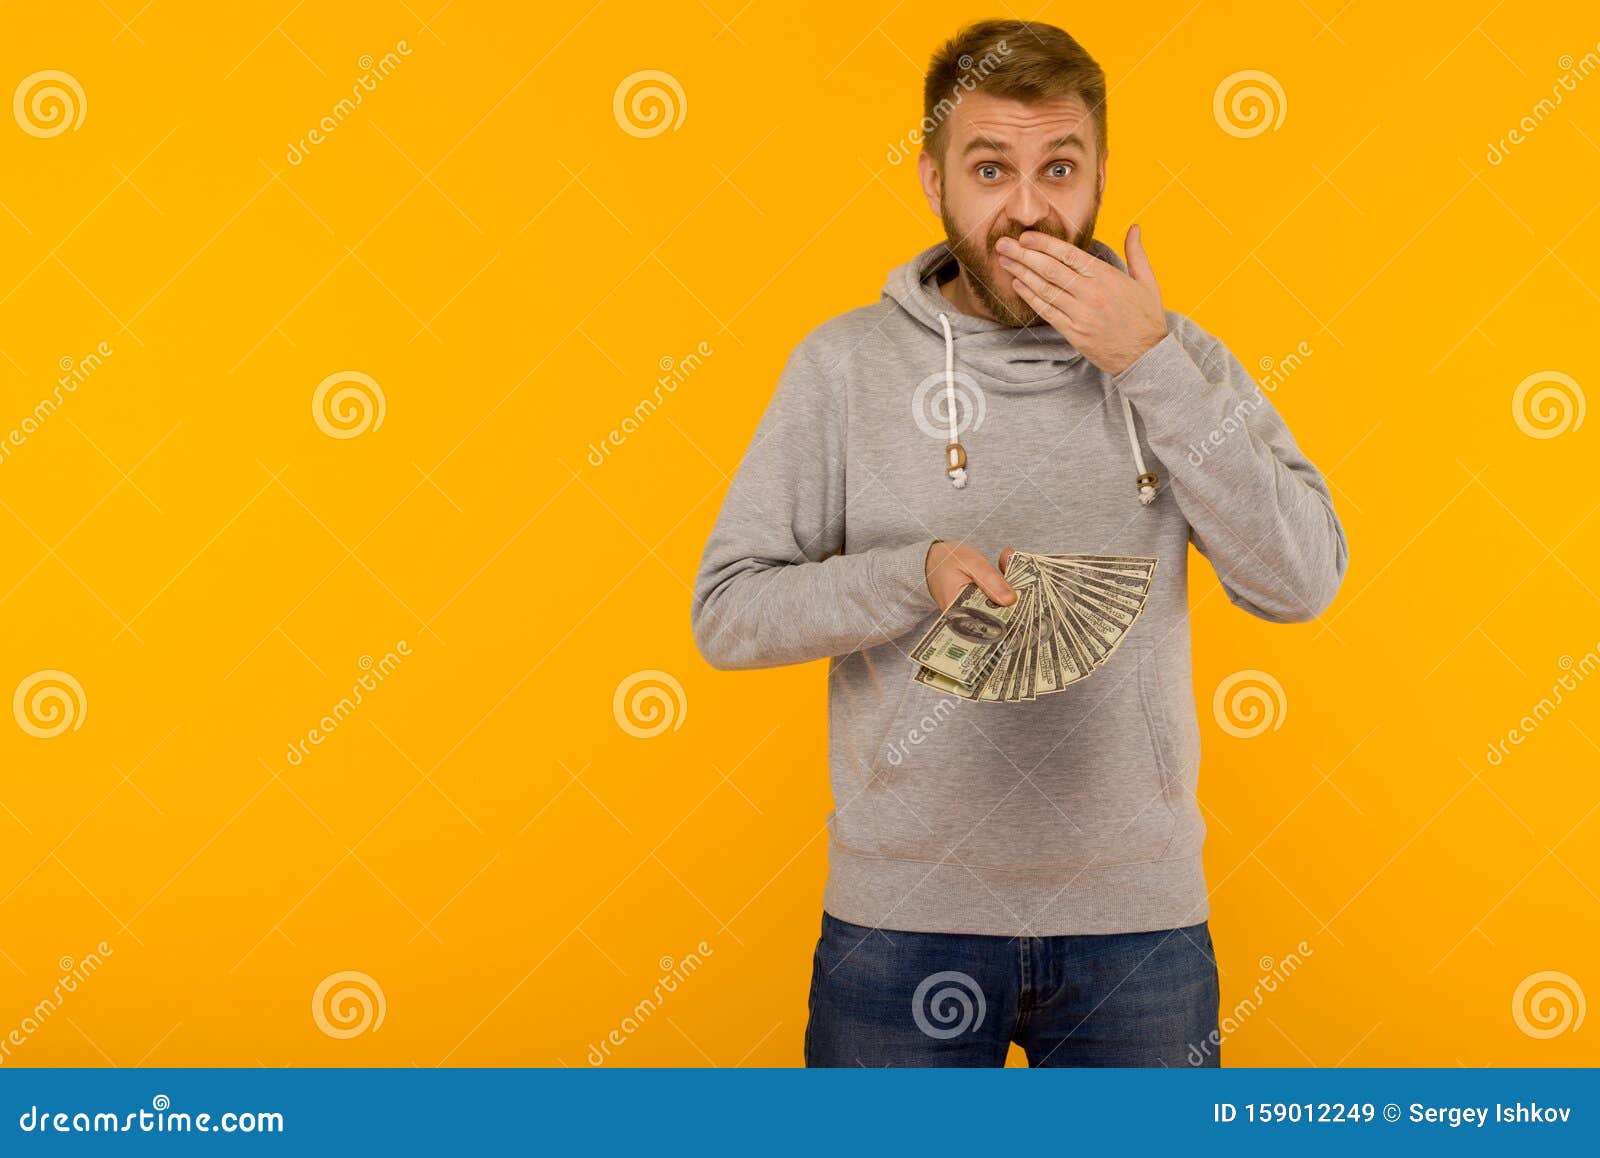 Joyful Man in a Gray Hoodie Holds Money Dollars Covering His Mouth with ...